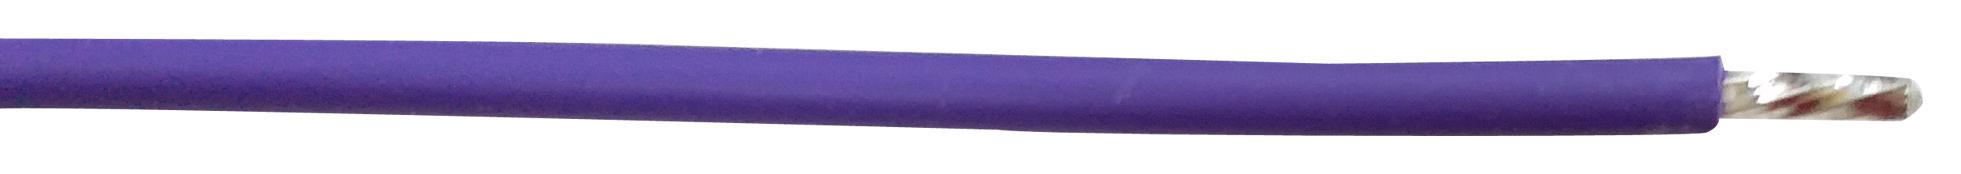 PP002358 HOOK-UP WIRE, 20AWG, PURPLE, 305M, 600V PRO POWER